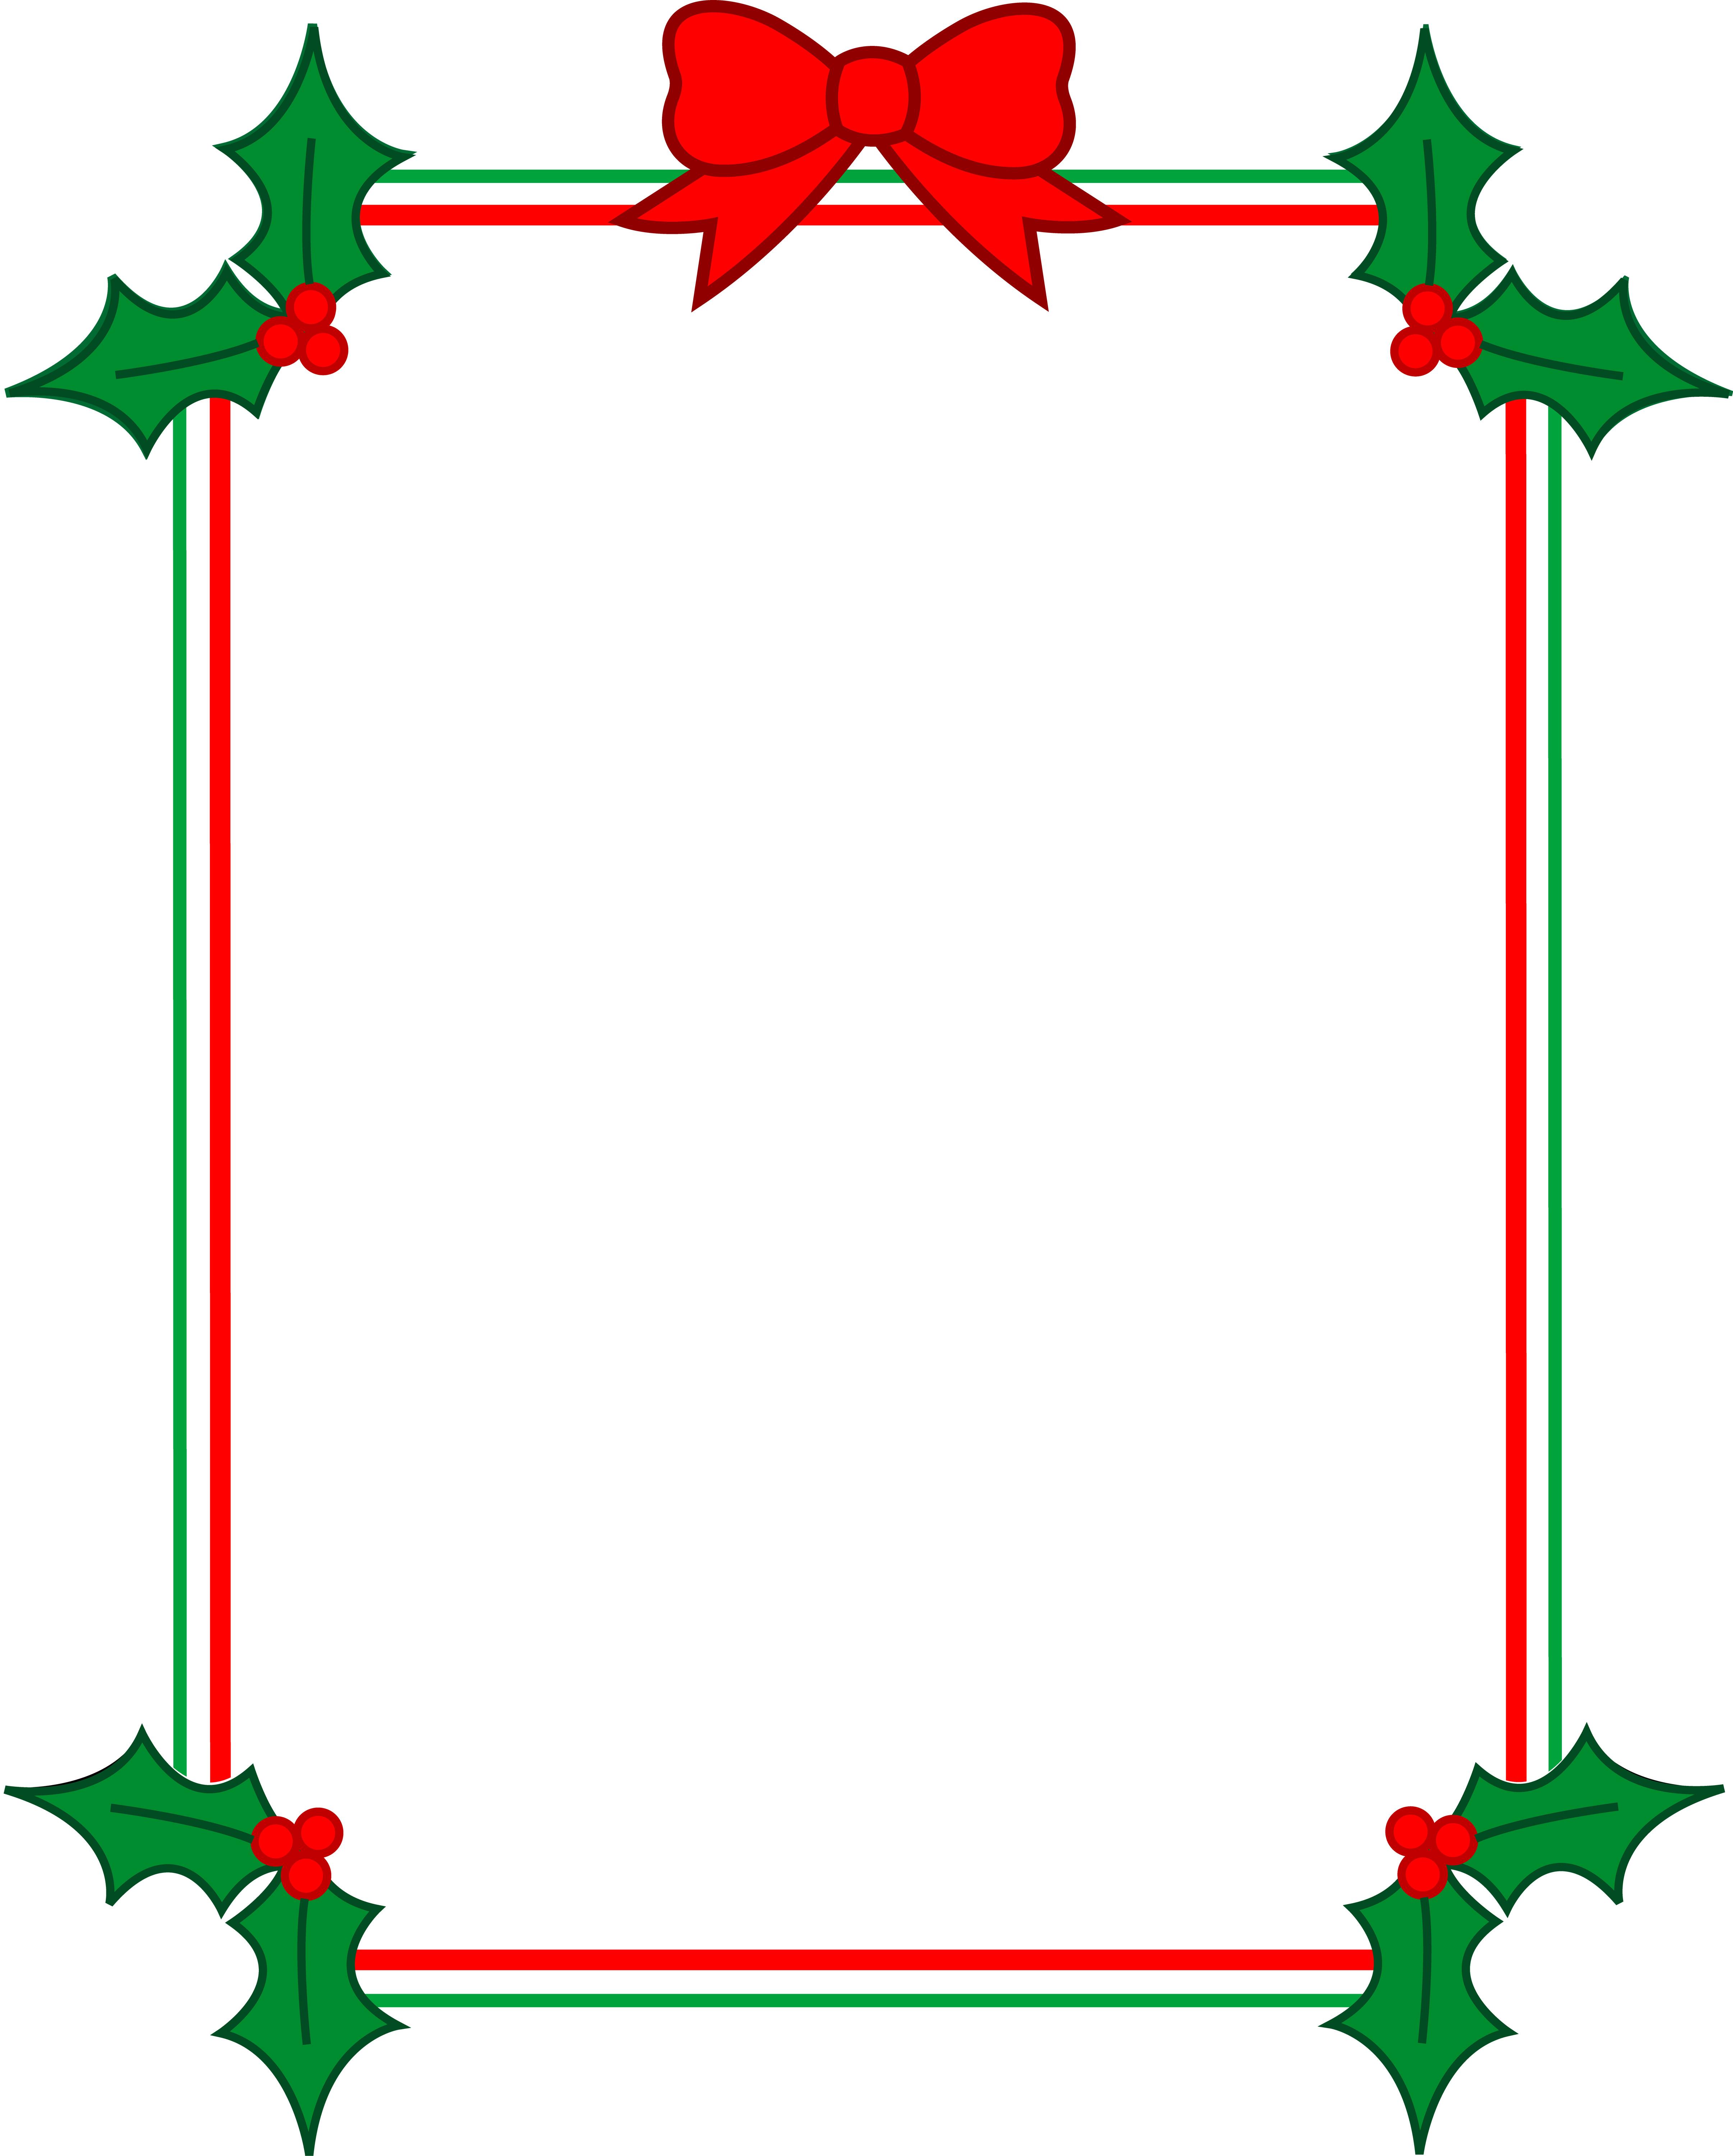 Christmas clip art borders for word documents